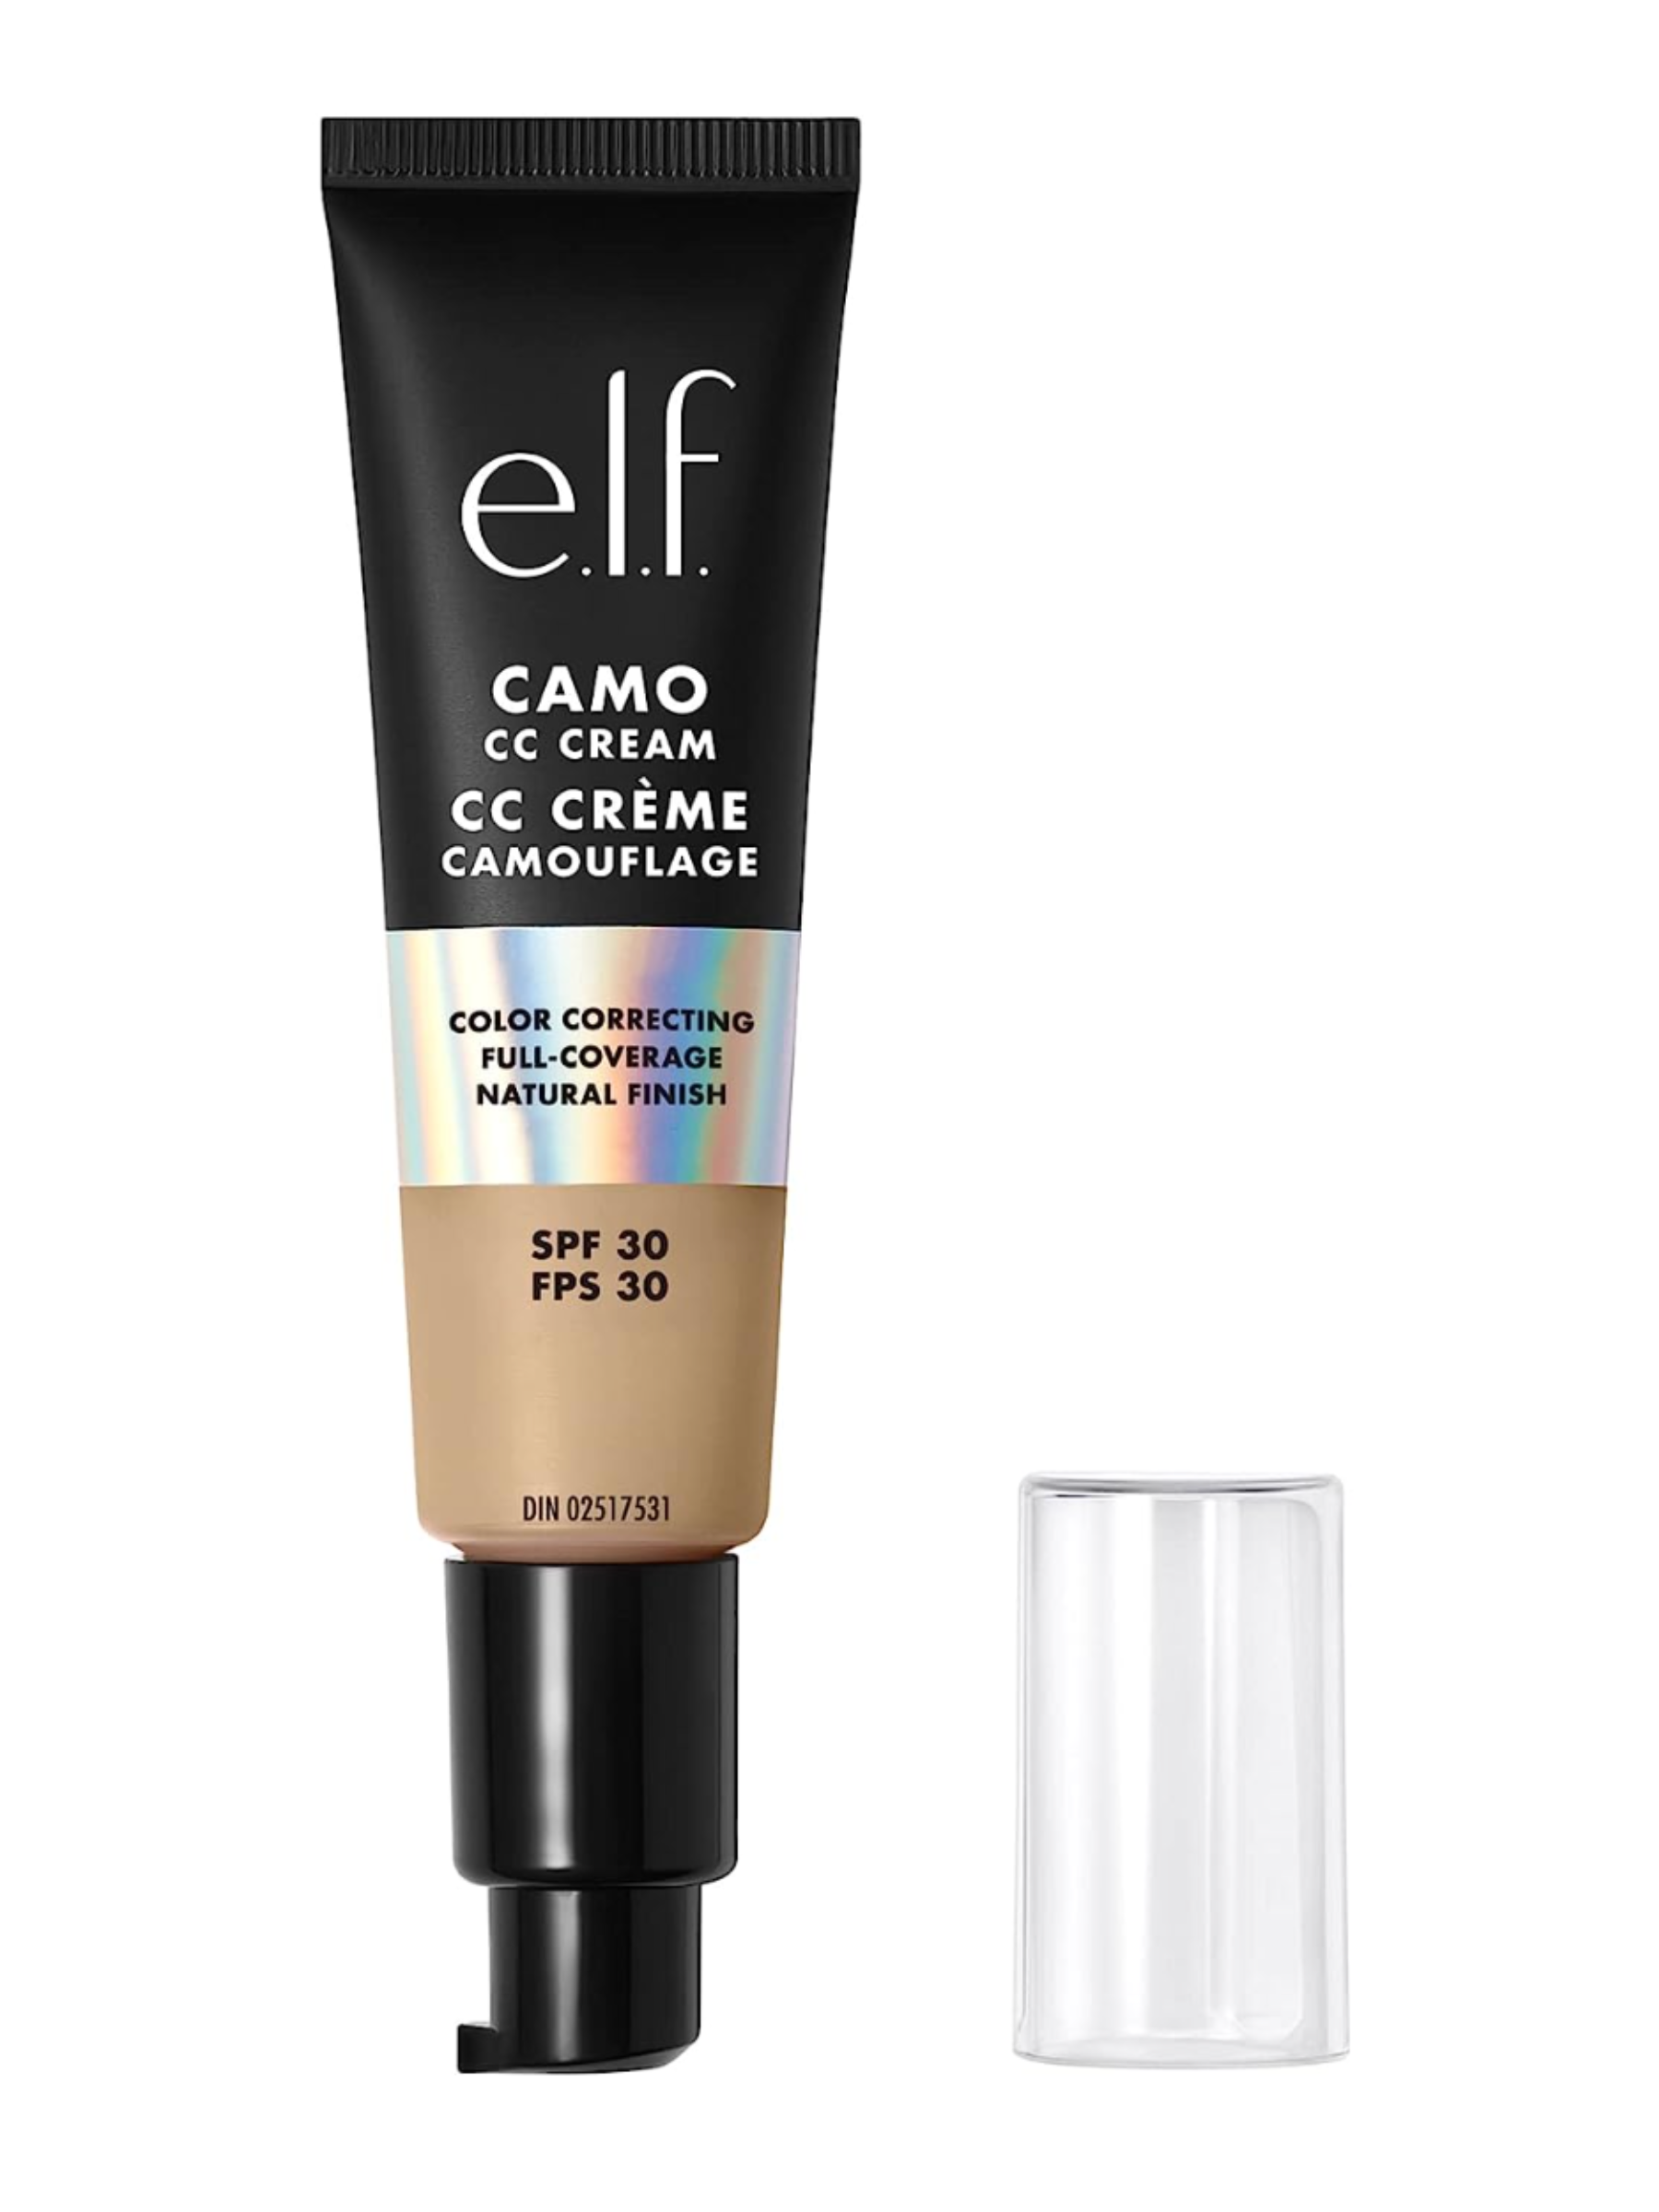 <p>“The e.l.f. Camo CC Cream is one of the best drugstore beauty options out there, with an impeccable shade range and varied undertones so your perfect match is always available,” raves Ulta beauty makeup expert and host of <a href="https://www.instagram.com/thelifeofamakeupartist/">The Life of a Makeup Artist</a> podcast, <a href="https://www.instagram.com/jaleesajaikaran/">Jaleesa Jaikaran</a>. “Like most CC creams, it offers skin care and color correction benefits, however, this one takes a step further with a semi-matte finish.” At $15 a pop and an impressive SPF 50 rating, the CC cream diffuses imperfections while seamlessly blending out to a medium or full coverage.</p> <p><strong>Size:</strong> 1.05 ounces / <strong>Shades:</strong> 30 / <strong>Key Ingredients:</strong> Collagen, peptides, niacinamide / <strong>Finish:</strong> Semi-matte / <strong>SPF:</strong> 50</p> <ul> <li><strong>Pros</strong>: Buildable medium-to-full coverage, great value</li> <li><strong>Cons</strong>: Transfers</li> </ul> $15, Amazon. <a href="https://www.amazon.com/l-f-Correcting-Medium-Coverage-Foundation/dp/B09XMVYZCM">Get it now!</a><p>Sign up for today’s biggest stories, from pop culture to politics.</p><a href="https://www.glamour.com/newsletter/news?sourceCode=msnsend">Sign Up</a>